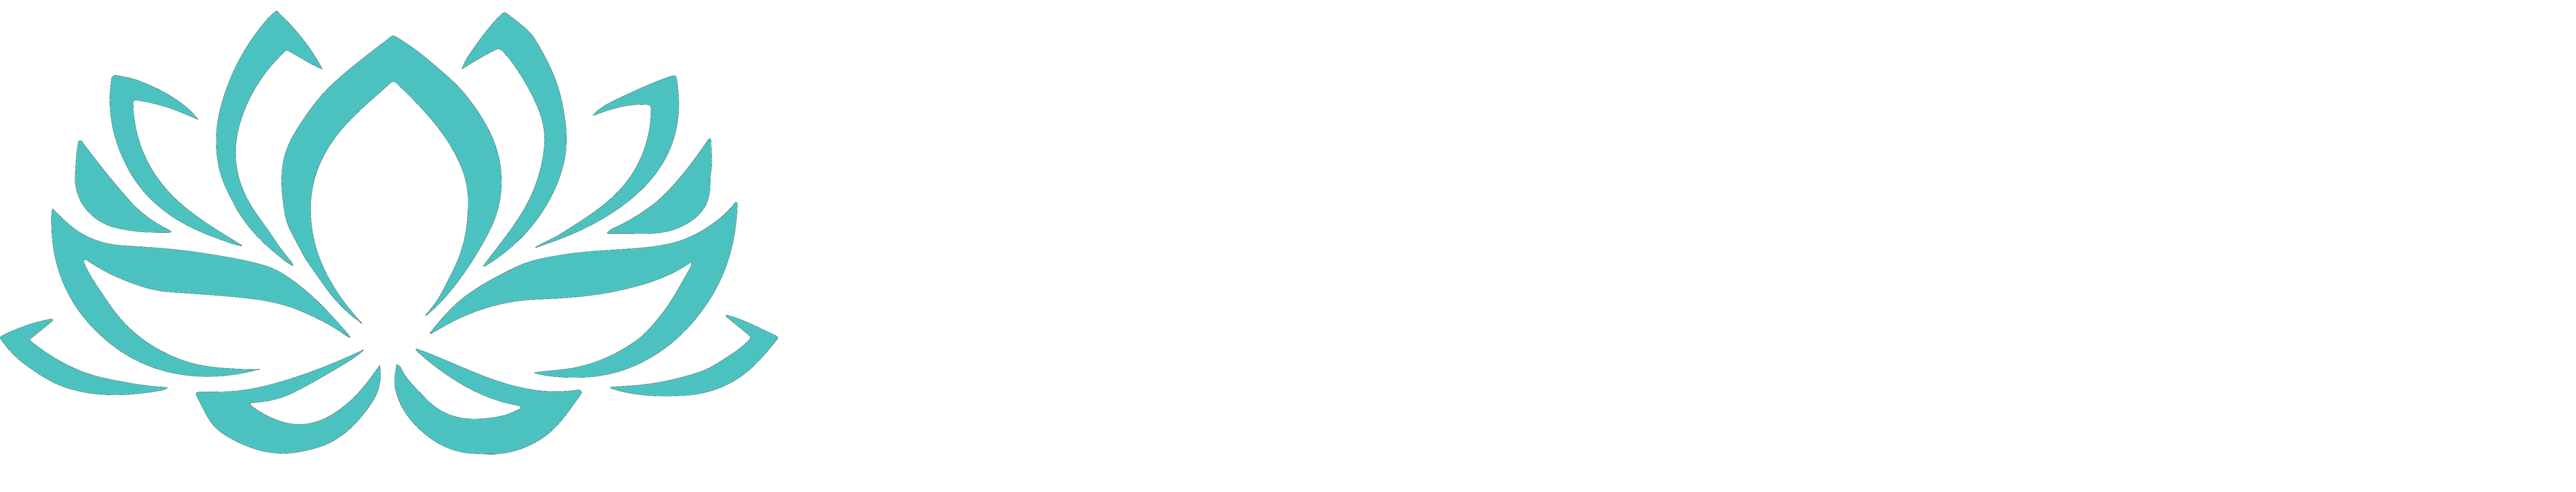 Mind and Body Pain Clinic